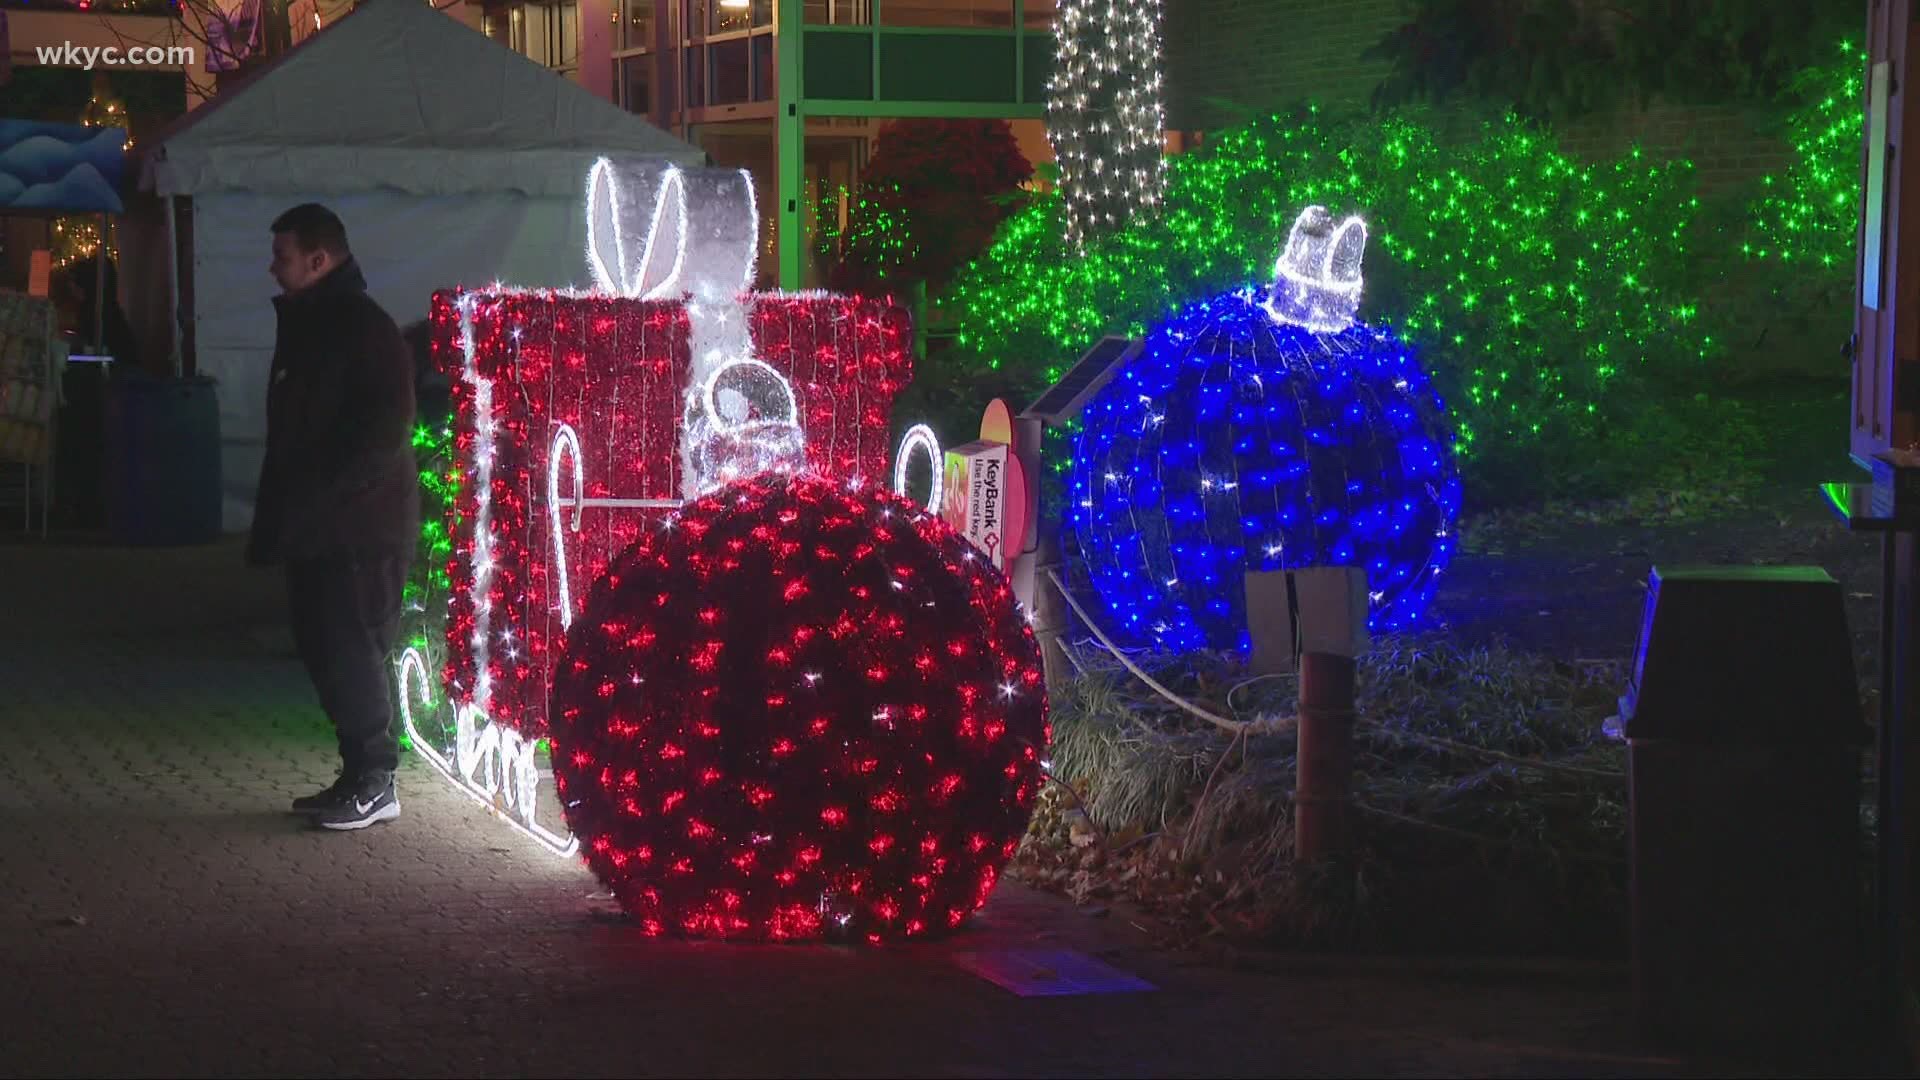 Wild Winter Lights returns to Cleveland Zoo for 2020 holidays | 0